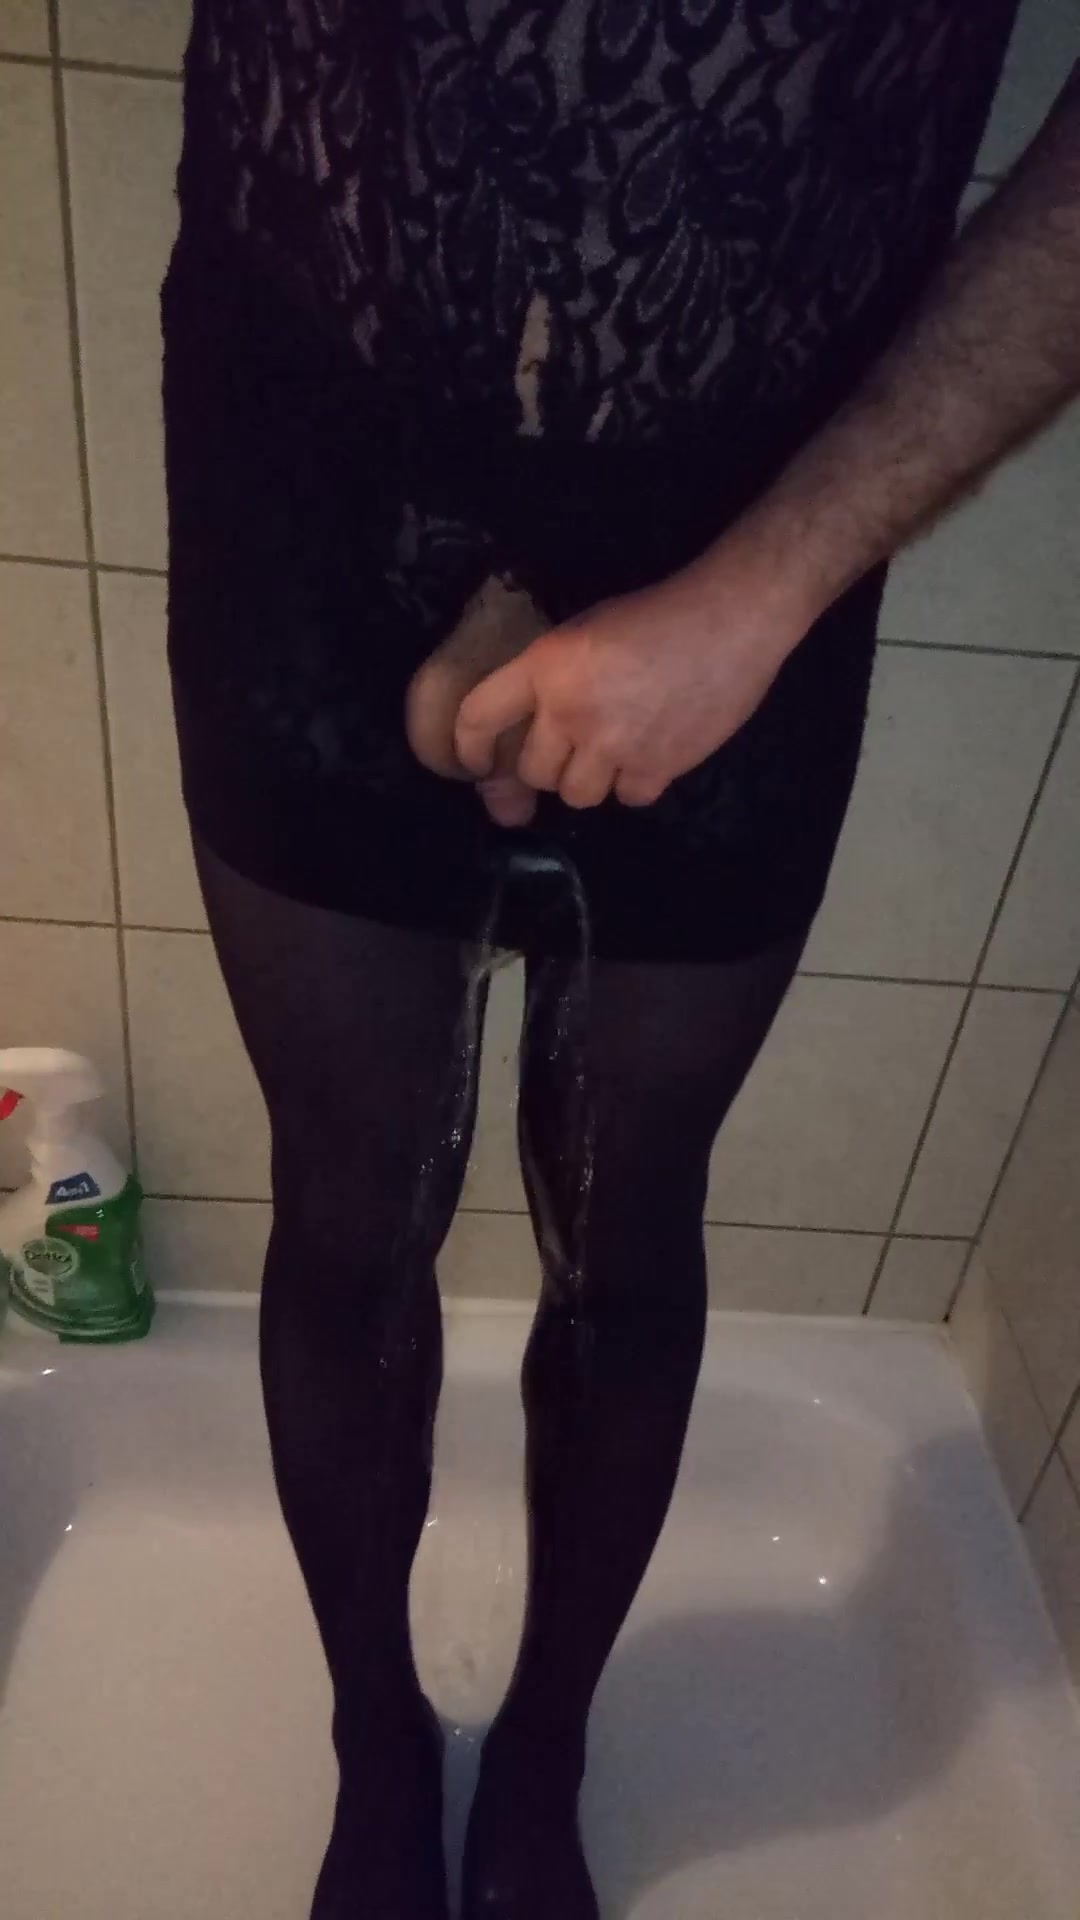 Pissing my feet, damned got dressed first